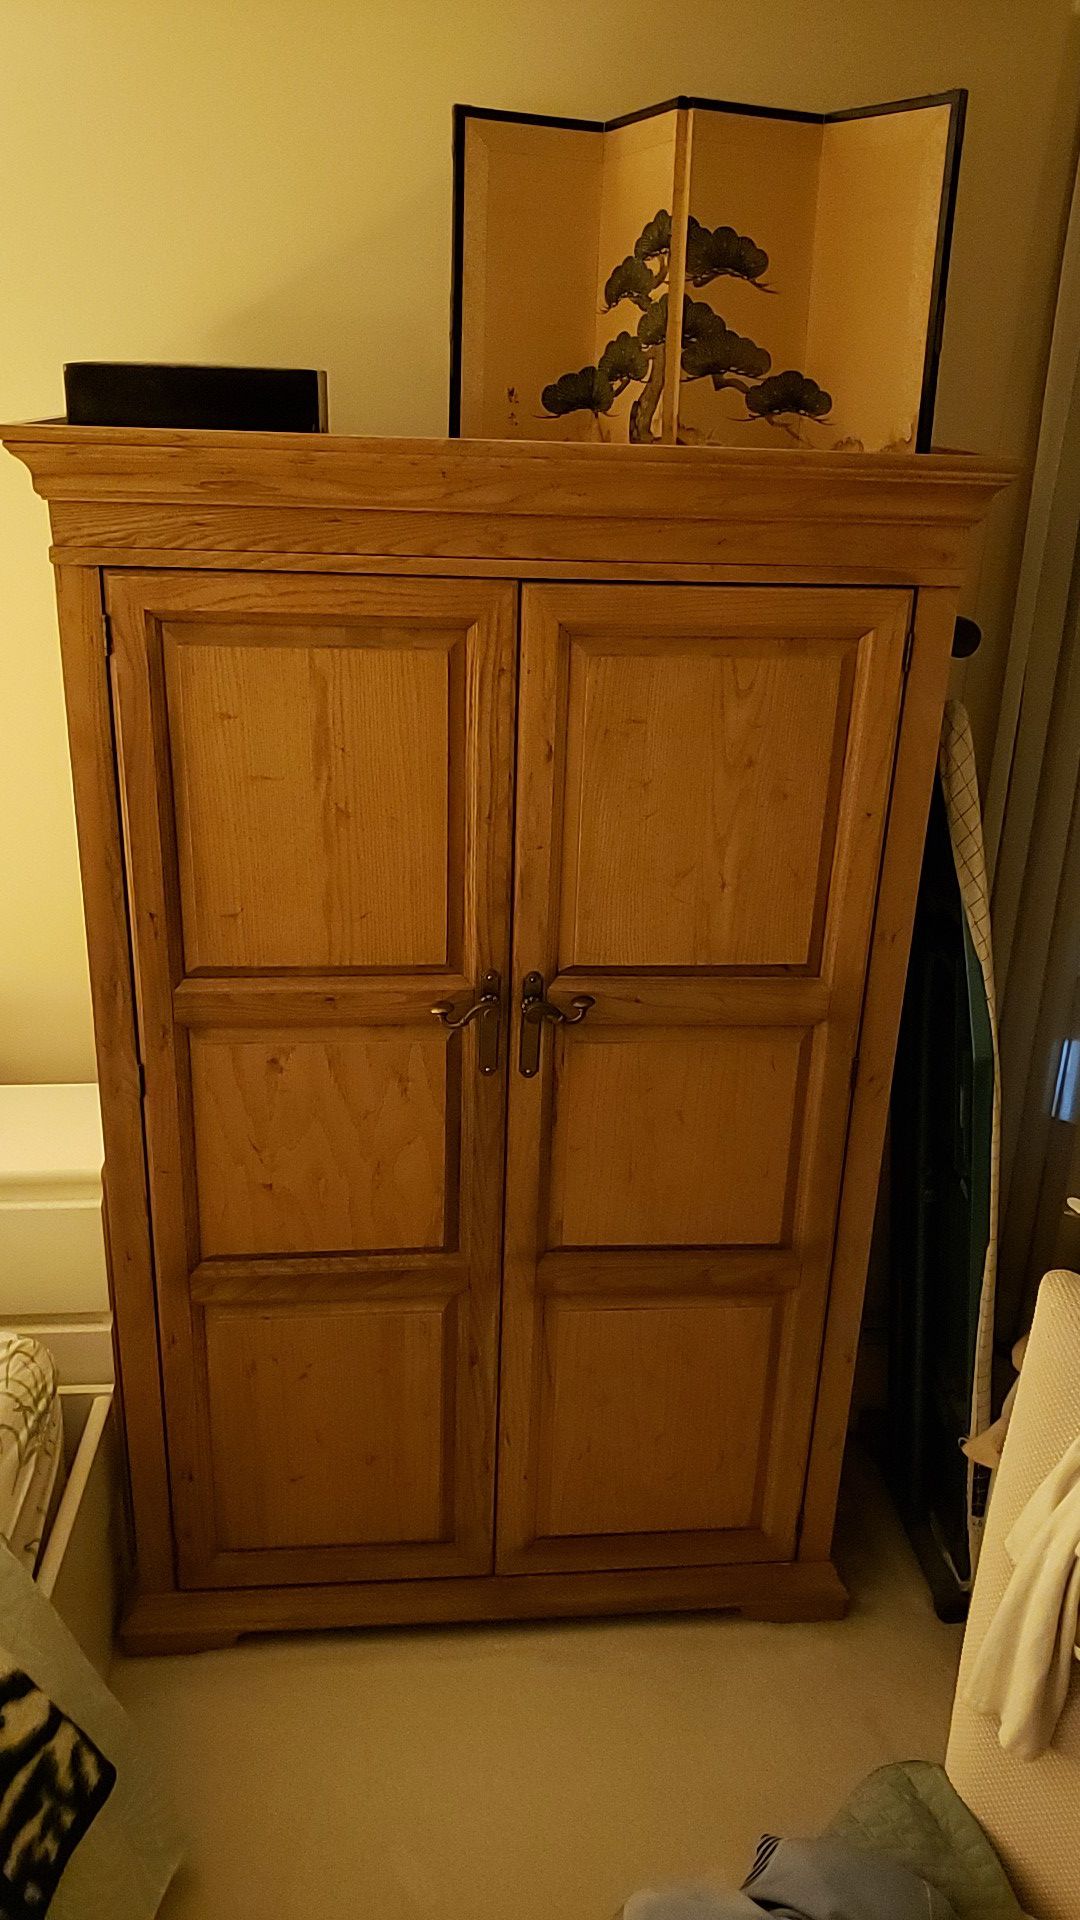 Antique Solid Wood Antique ARMOIRE 44.5"×20.5"×68" must be able to Move from an Apartment in Bellevue